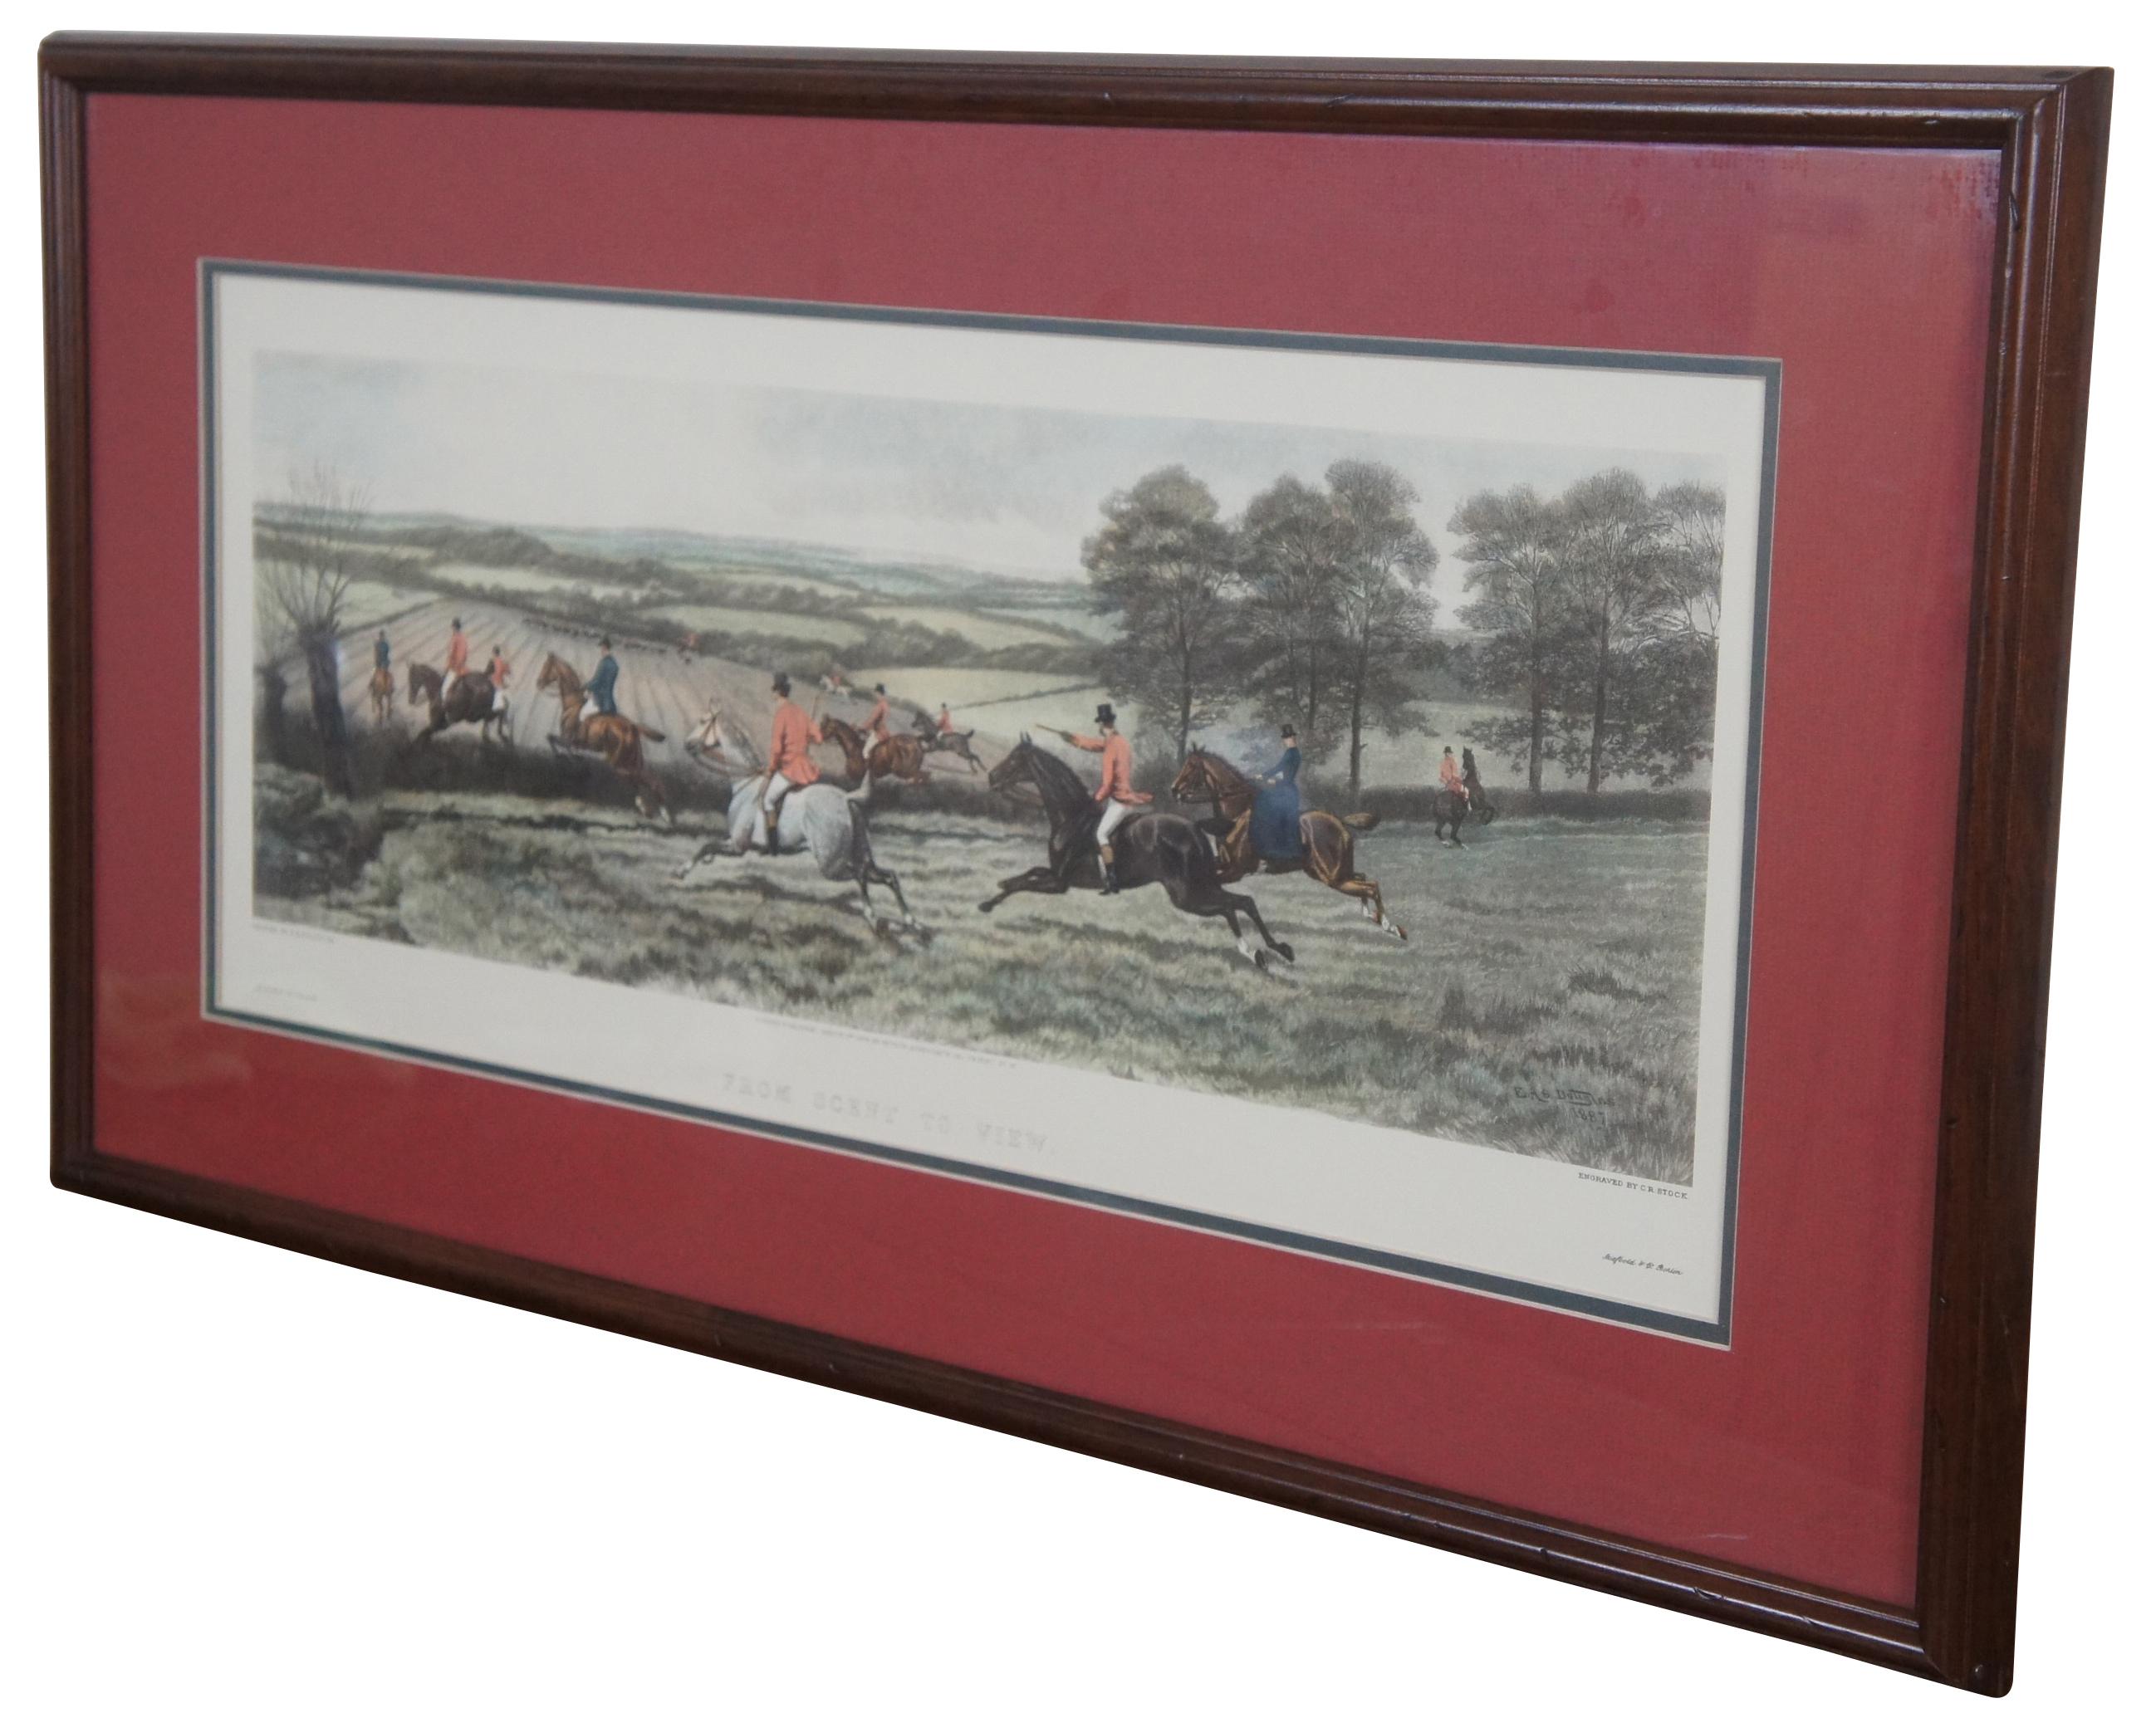 Antique colored lithograph print of an English equestrian and fox hunt scene featuring horses hounds galloping through the landscape of fields. Titled “From Scent to View,” from a painting by E.A.S. Douglas and engraved by C.R. Stock, London